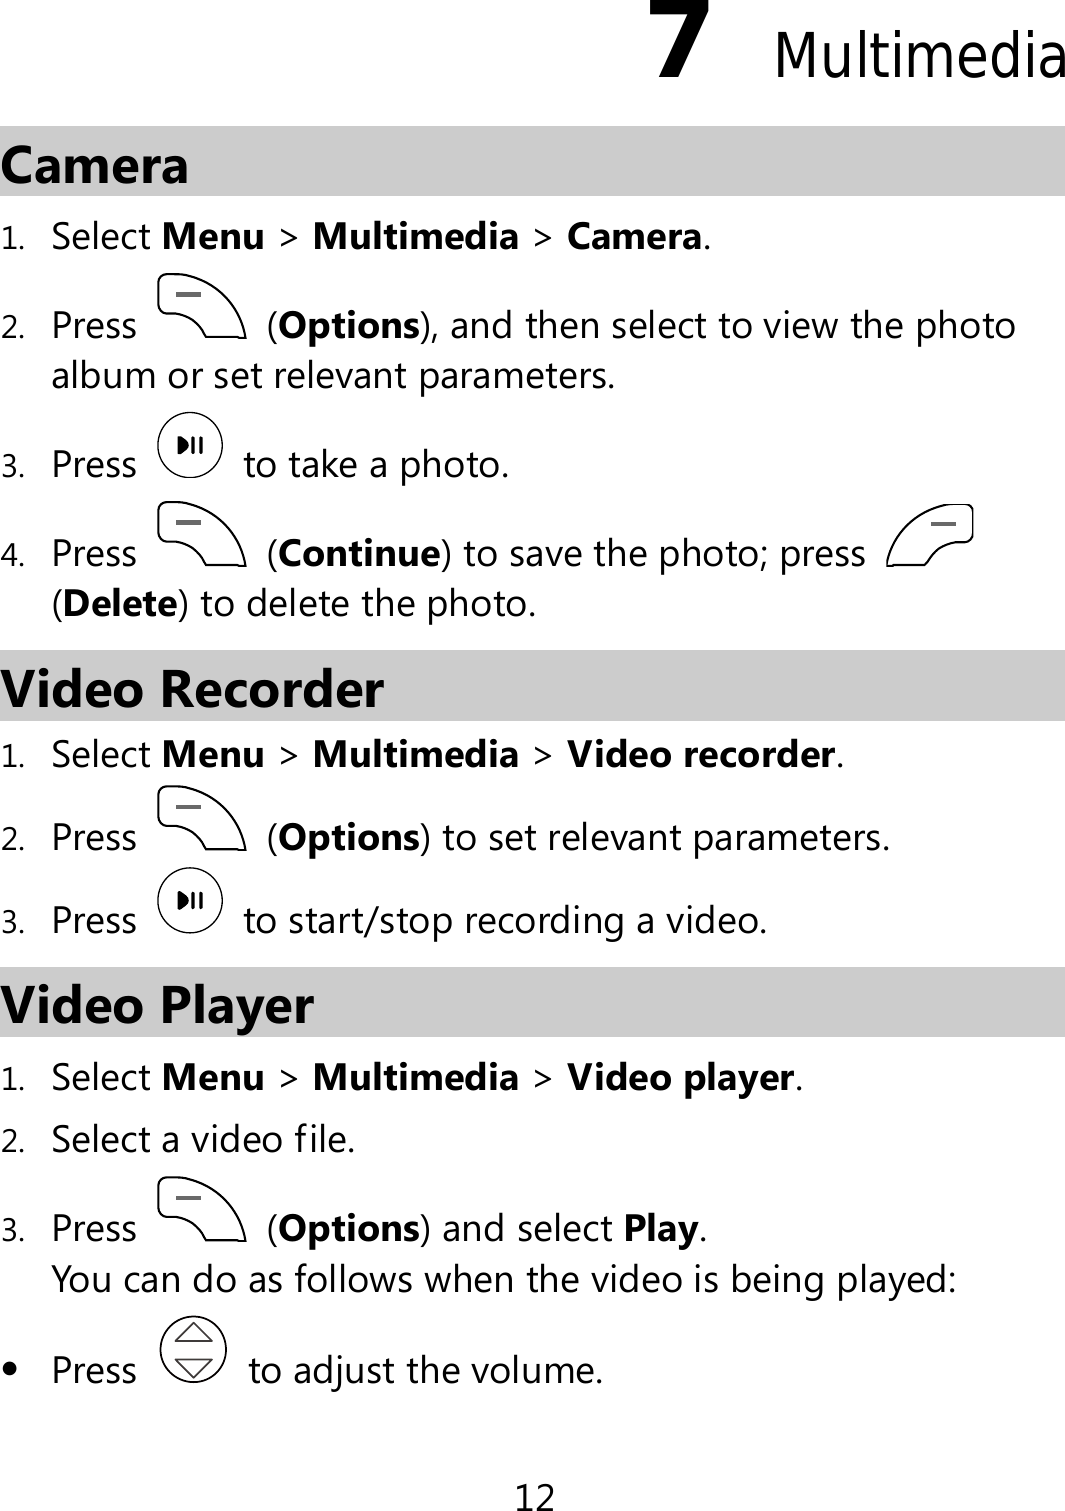 12 7  Multimedia Camera 1. Select Menu &gt; Multimedia &gt; Camera. 2. Press   (Options), and then select to view the photo album or set relevant parameters. 3. Press   to take a photo. 4. Press   (Continue) to save the photo; press   (Delete) to delete the photo. Video Recorder 1. Select Menu &gt; Multimedia &gt; Video recorder. 2. Press   (Options) to set relevant parameters. 3. Press    to start/stop recording a video. Video Player 1. Select Menu &gt; Multimedia &gt; Video player. 2. Select a video file. 3. Press   (Options) and select Play. You can do as follows when the video is being played:  Press   to adjust the volume. 